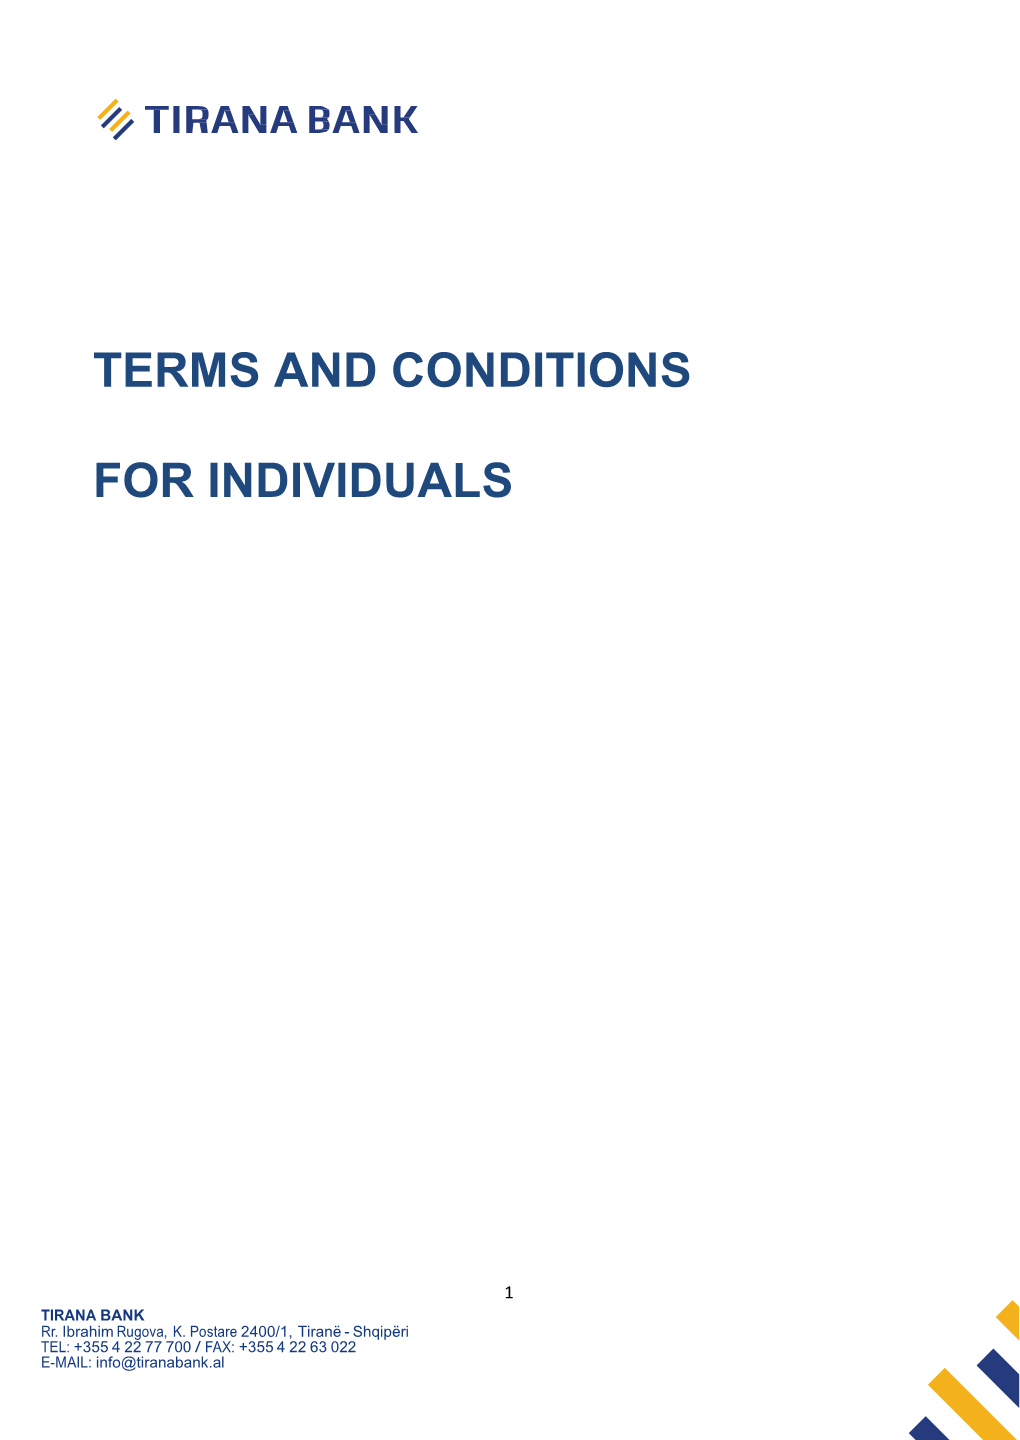 Terms and Conditions for Individuals